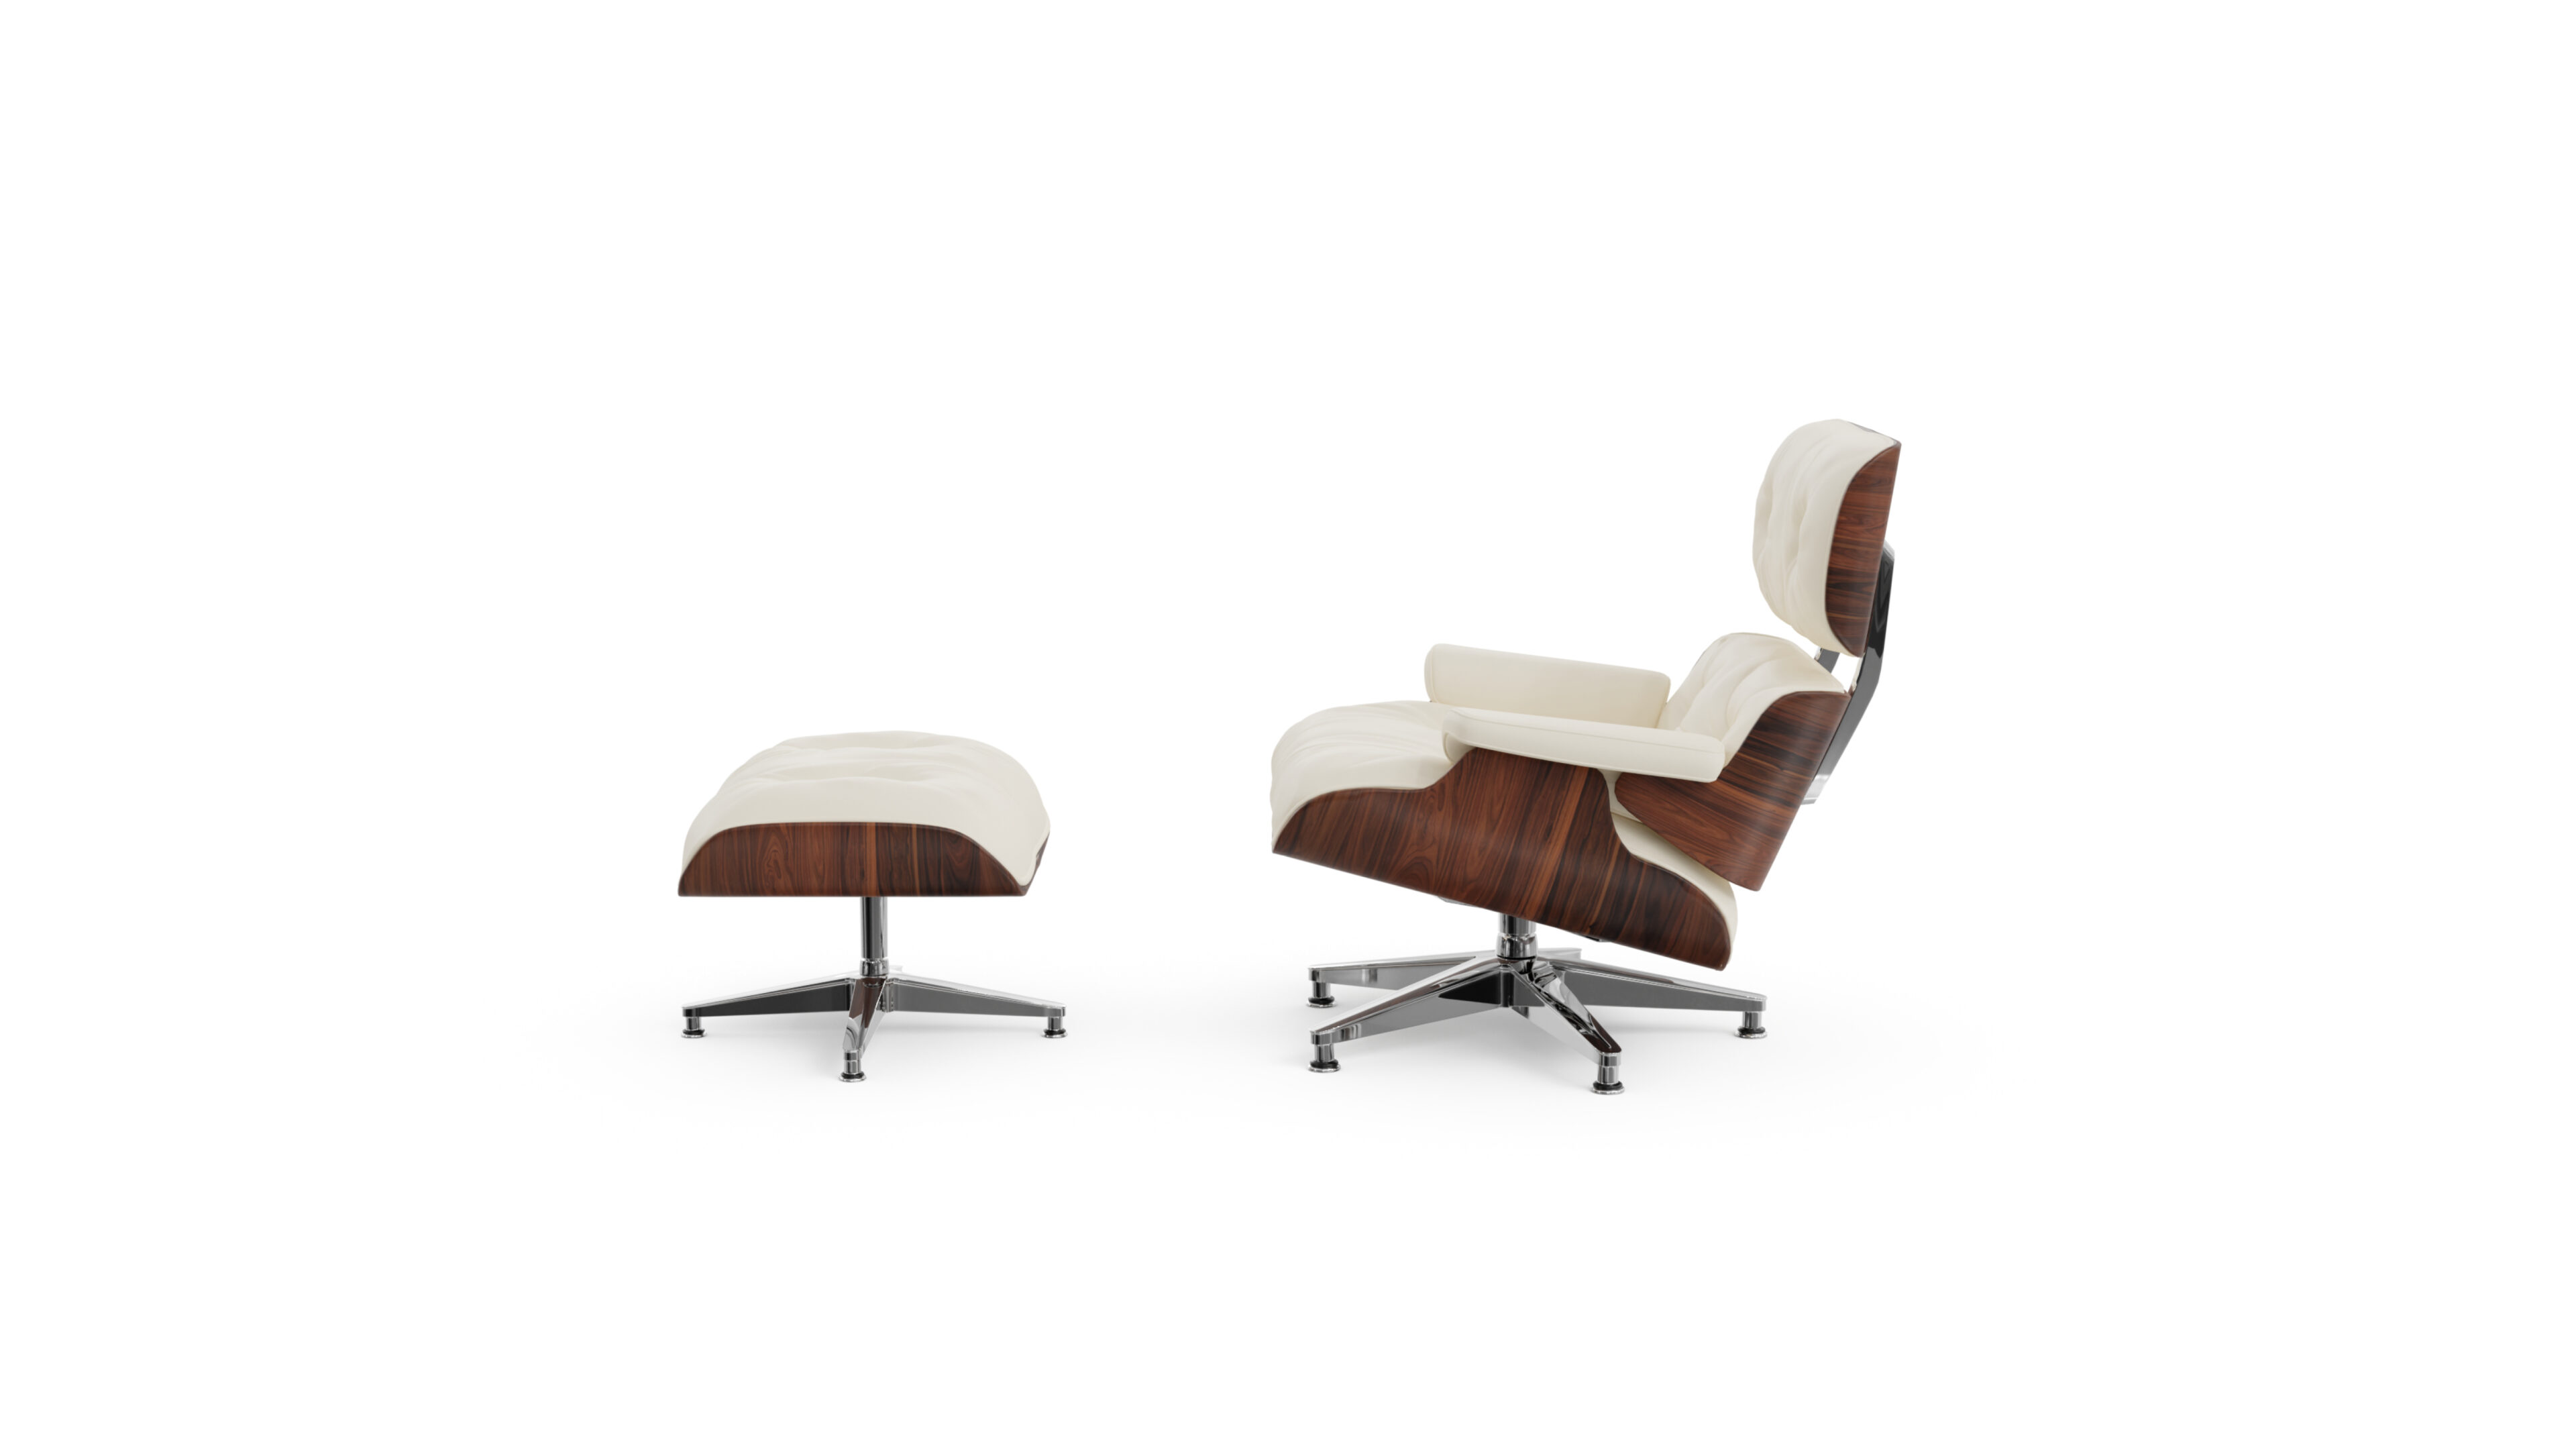 Eames Lounge Chair 670, Eames Ottoman 671, Herman Miller Base, Molded Plywood Reproduction by Archetype Forms - Charles & Ray Eames - Side-View